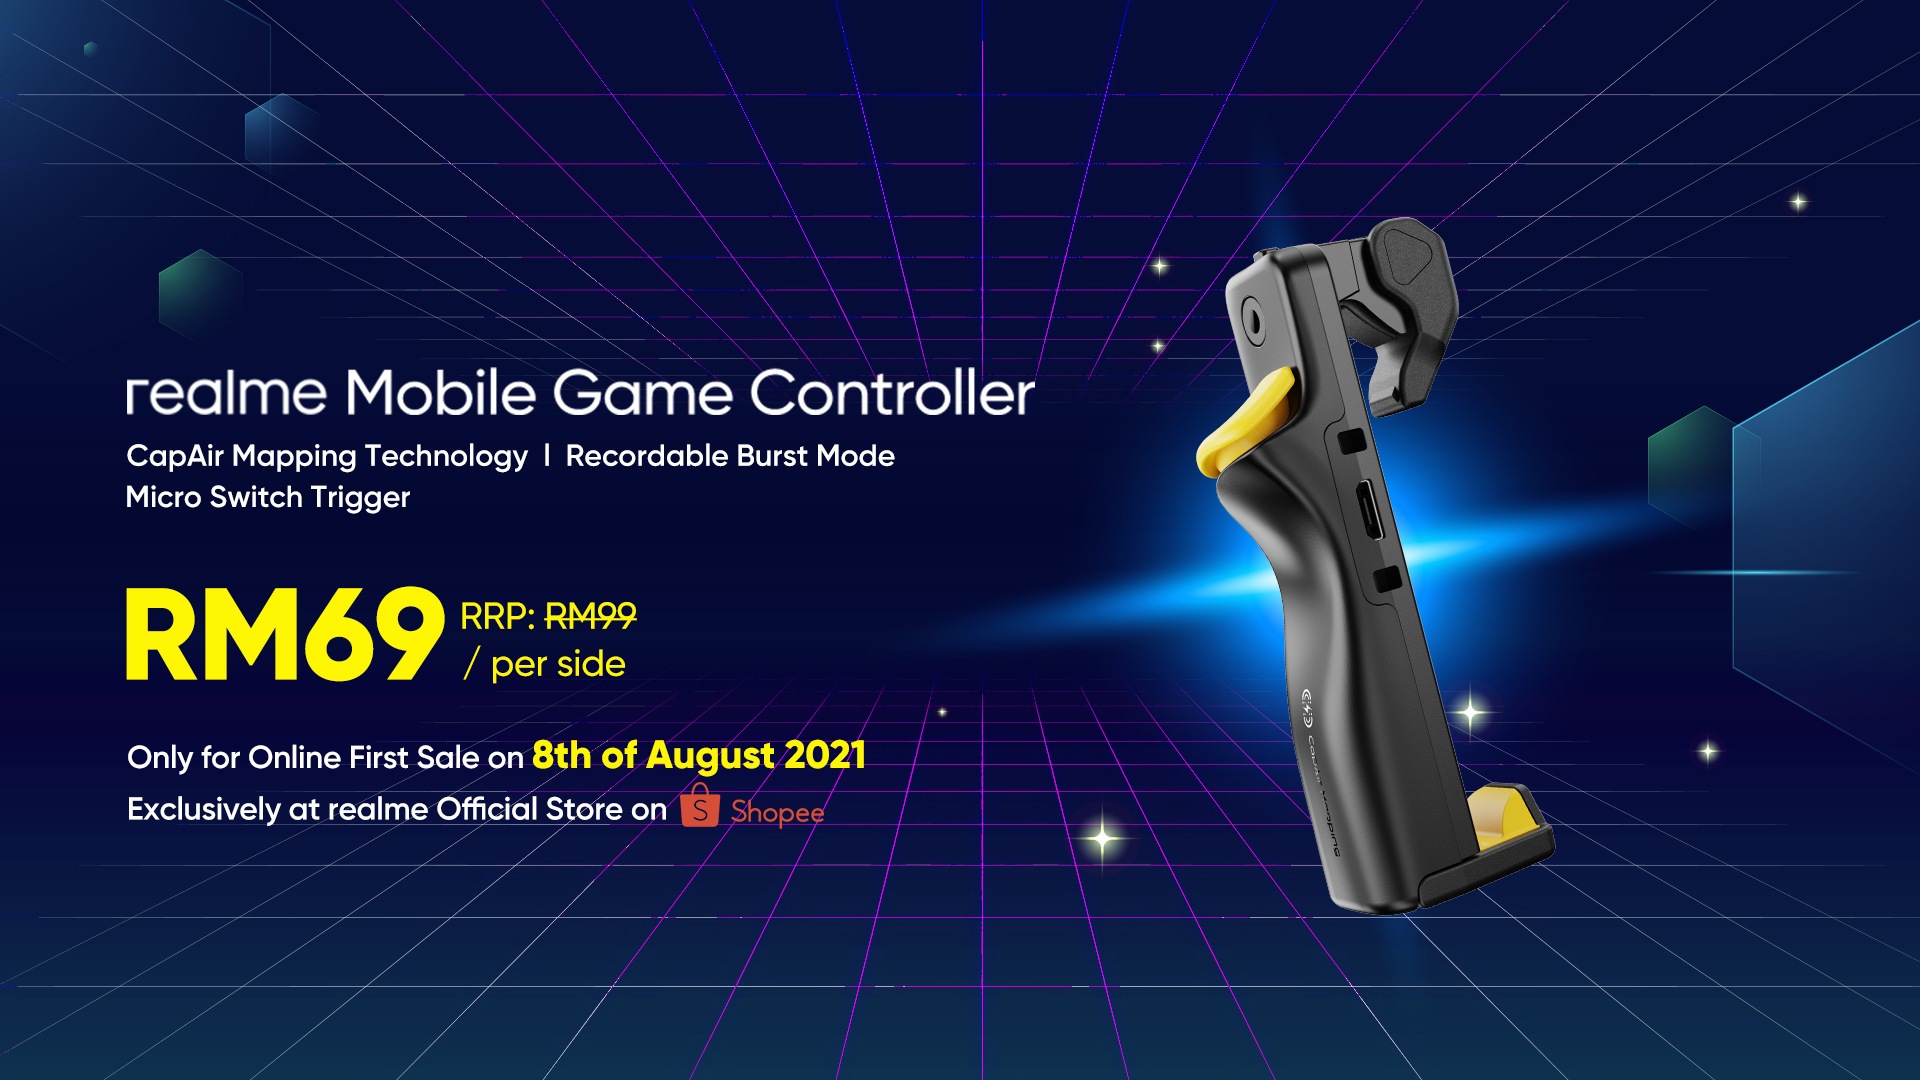 realme Mobile Game Controller First Sale on Shopee